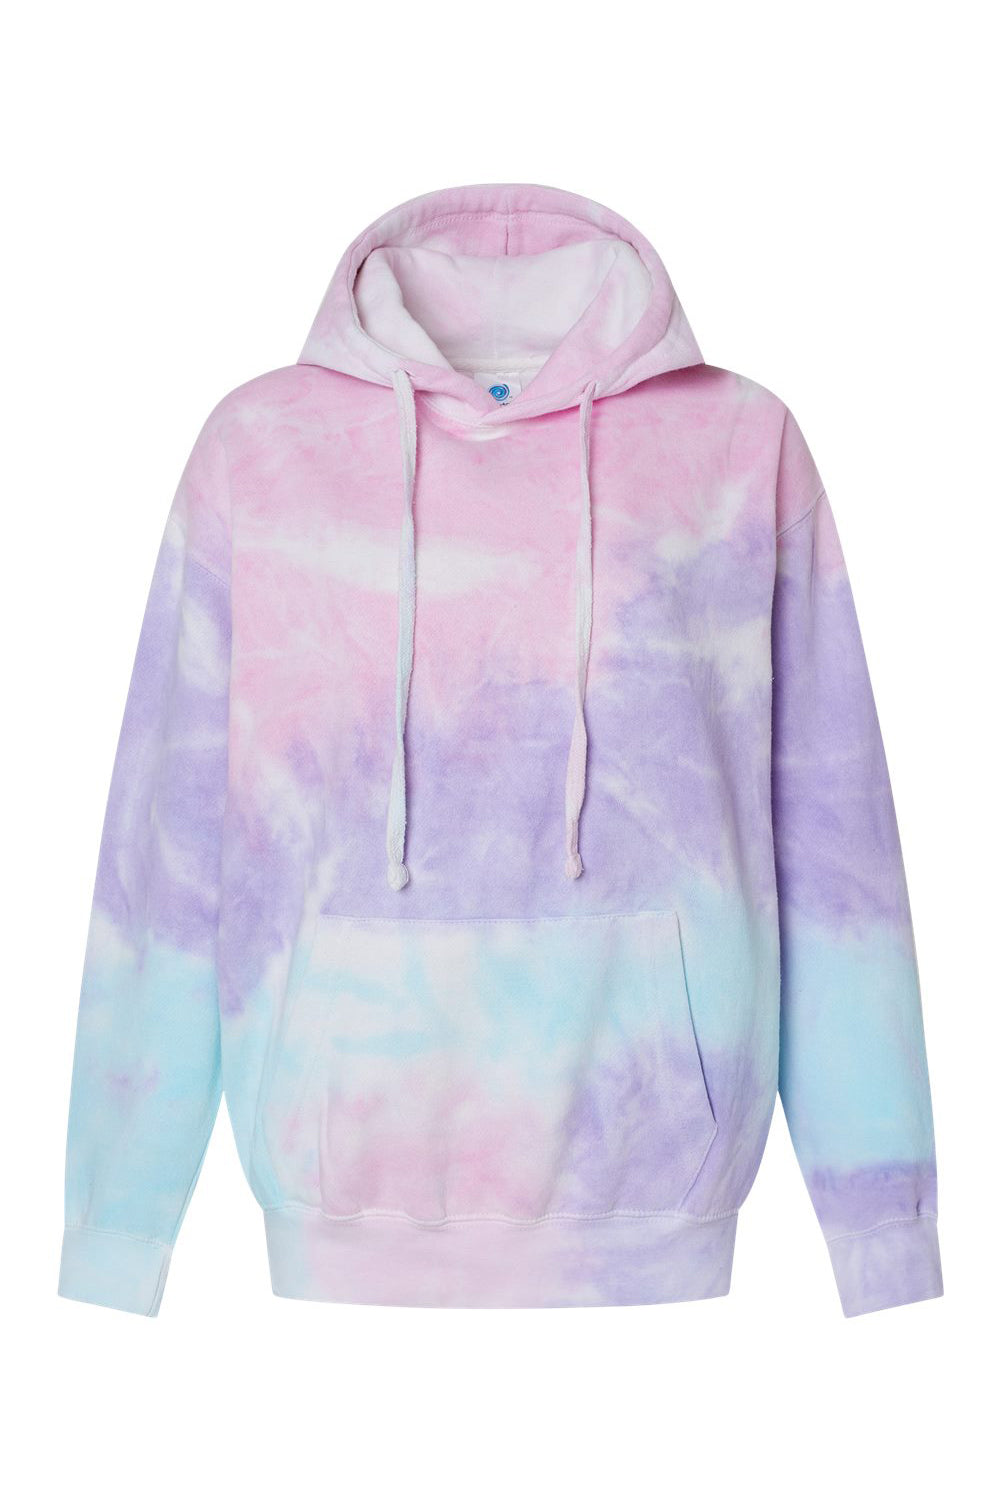 Colortone 8777 Mens Hooded Sweatshirt Hoodie Cotton Candy Flat Front